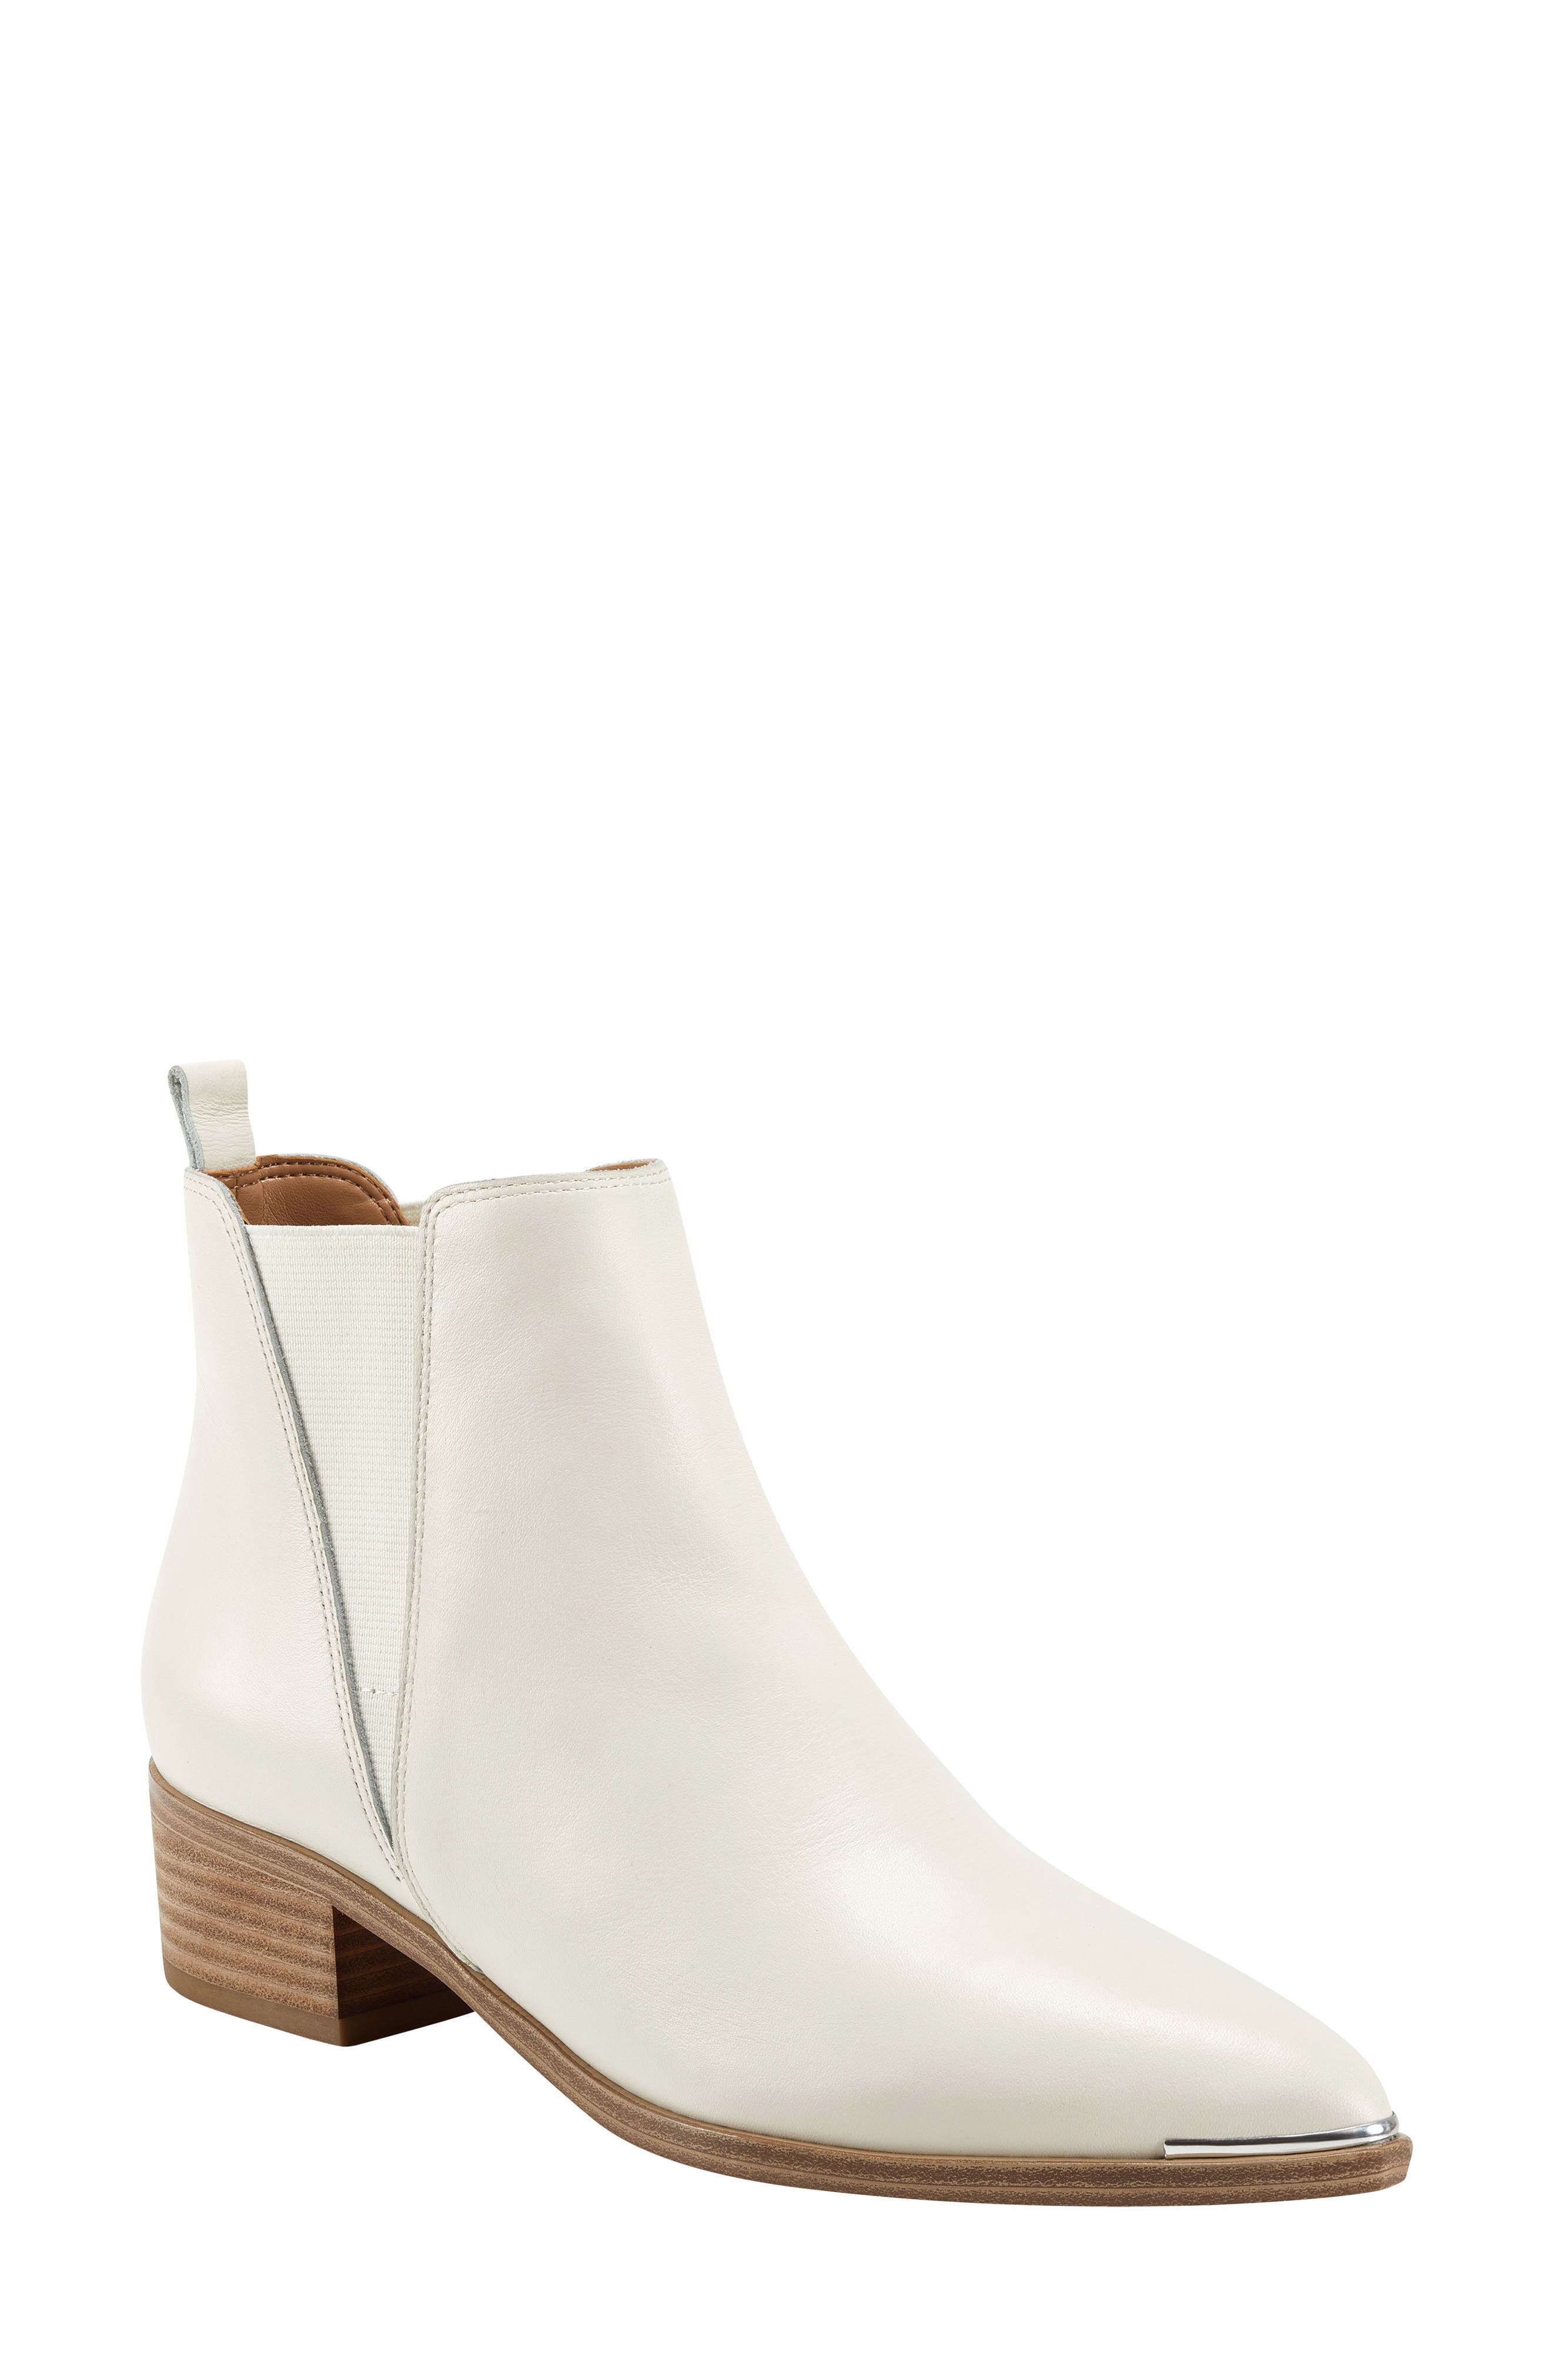 Women's Offwhite Booties \u0026 Ankle Boots 